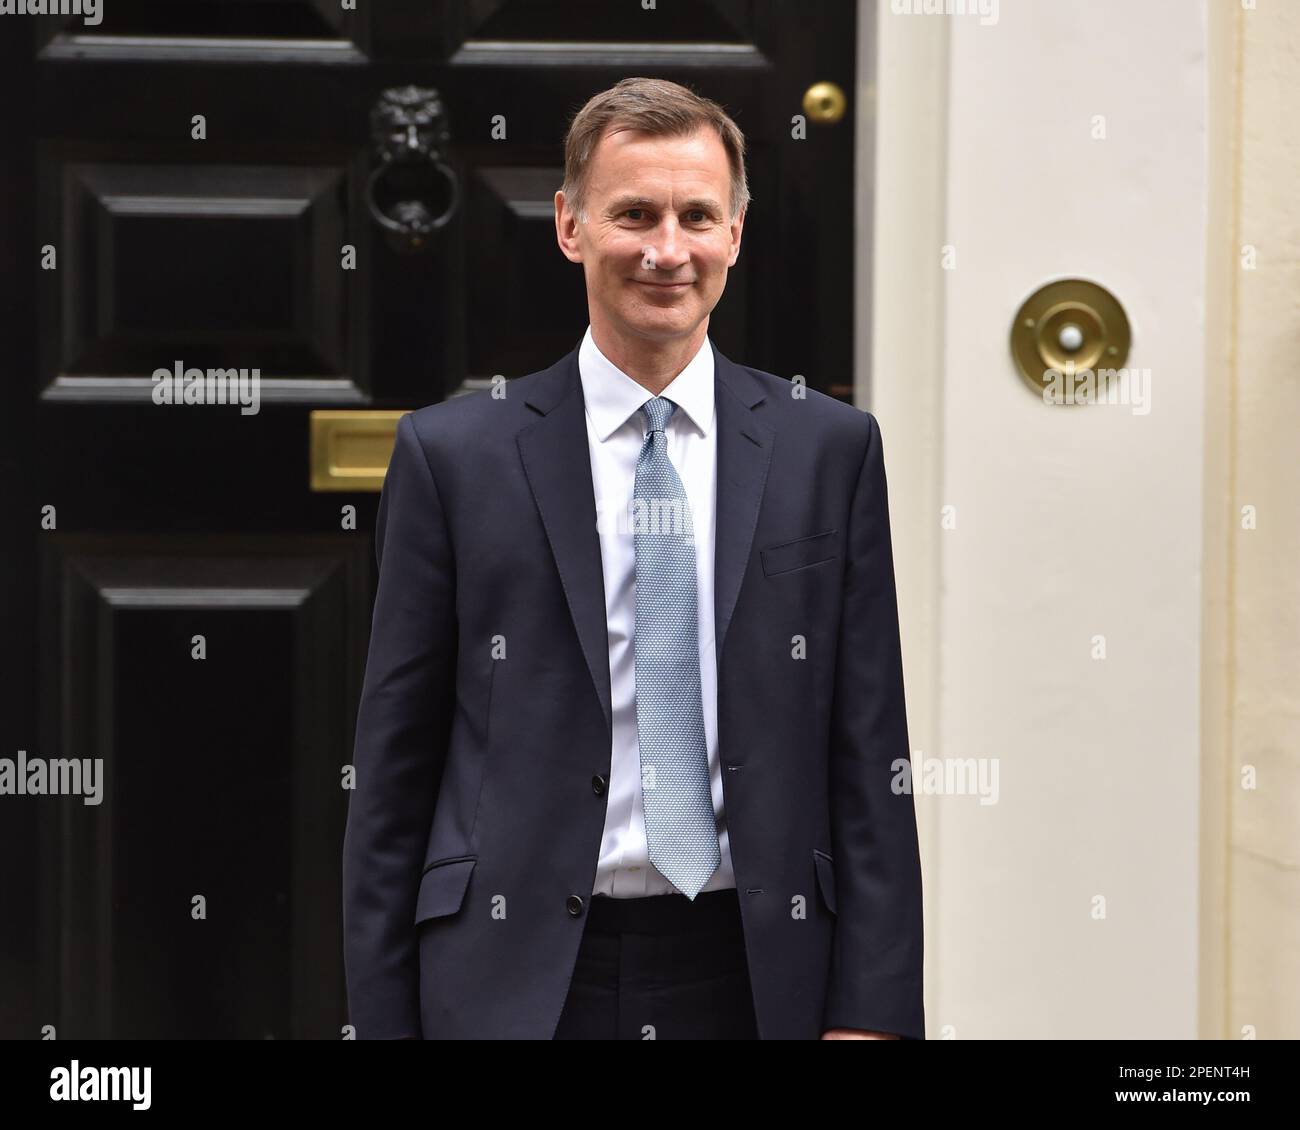 Chancellor of the Exchequer JEREMY HUNT leaves 11 Downing Street to deliver his Spring Budget to Parliament. Stock Photo